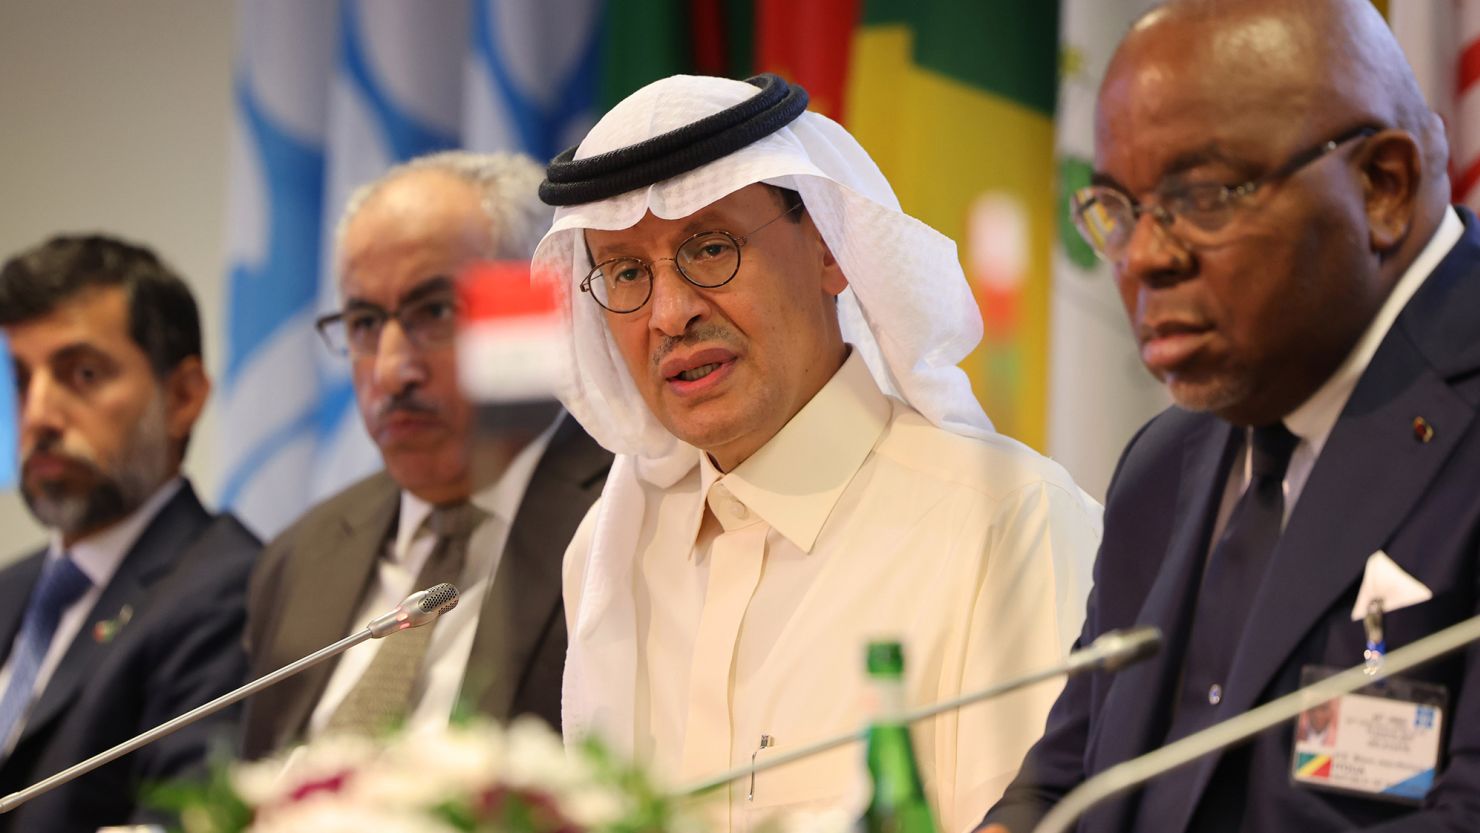 Abdulaziz bin Salman, Saudi Arabia's energy minister, center, speaks during a news conference following a meeting of OPEC+ countries in Vienna, Austria, on October 5. 